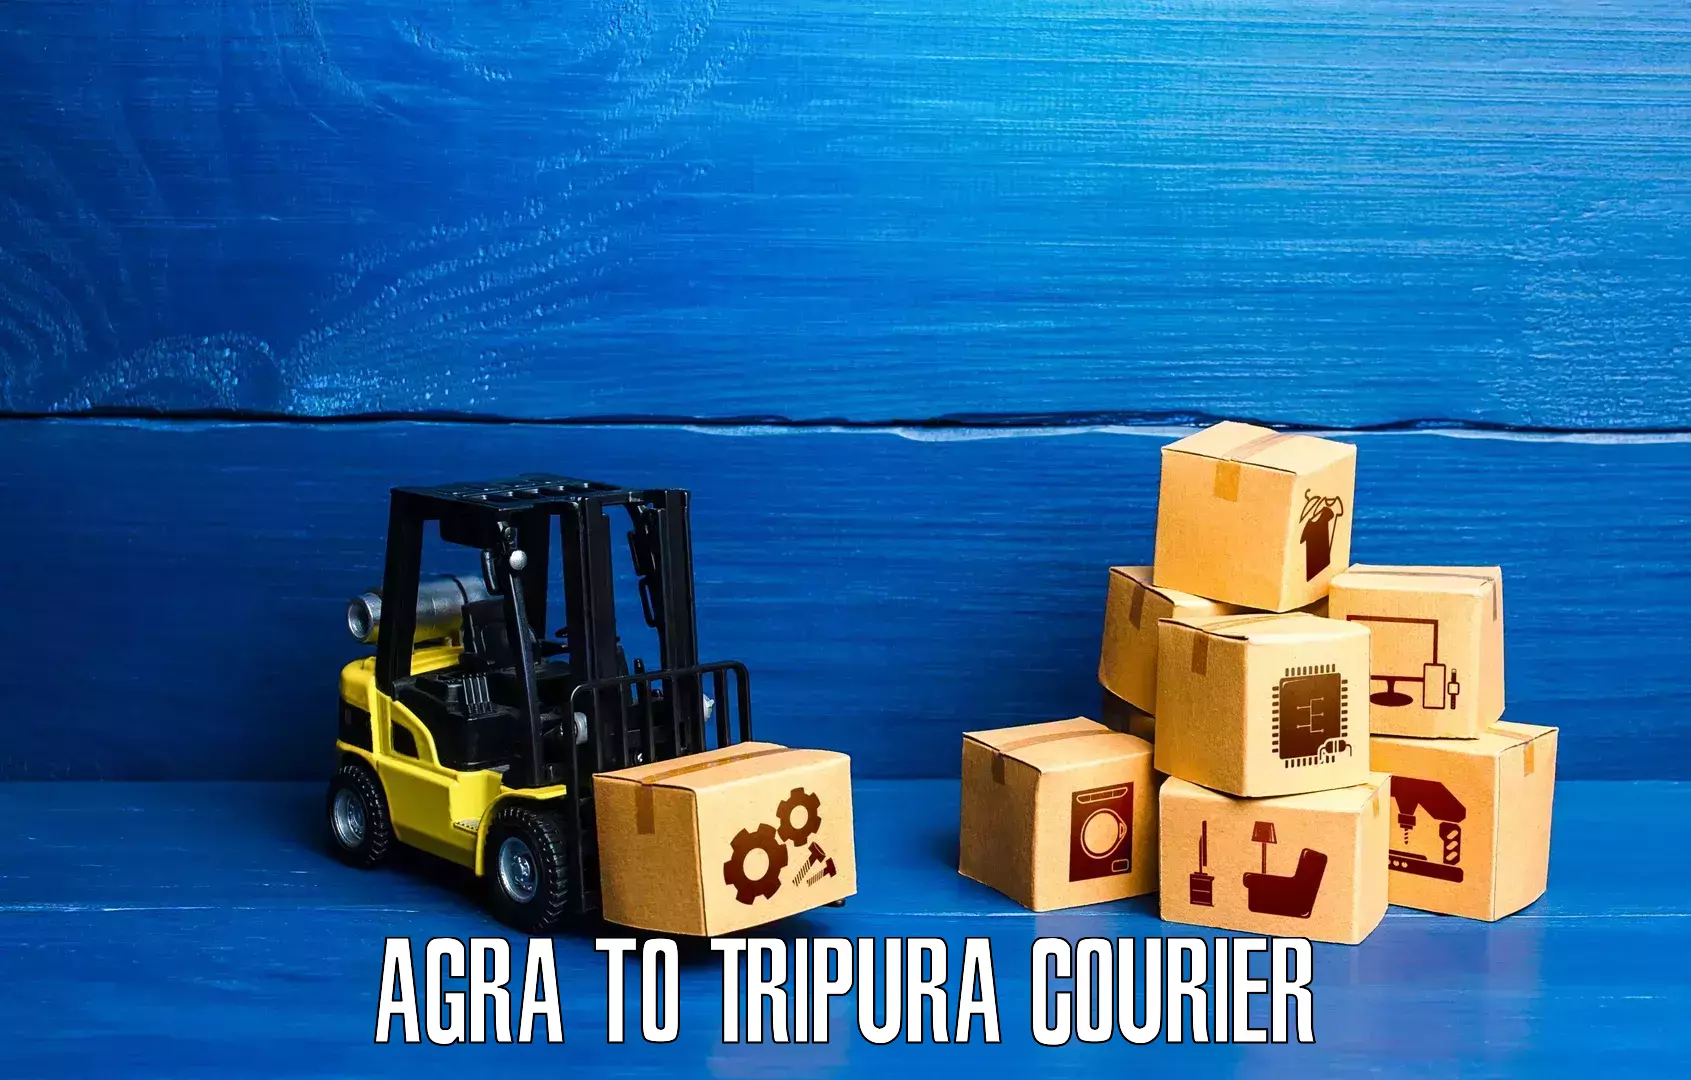 24-hour courier services Agra to Udaipur Tripura